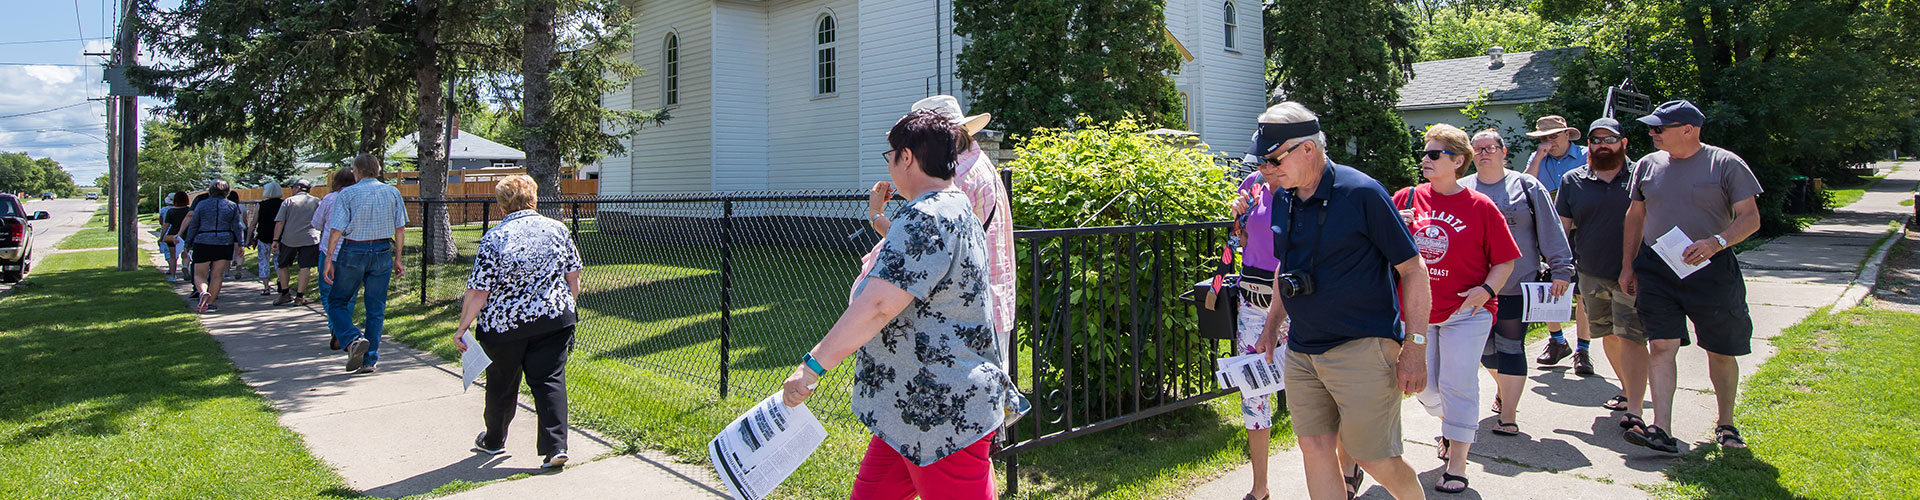 A groups walks past a church as part of the Open Doors Brandon tour held each summer in Brandon, Manitoba